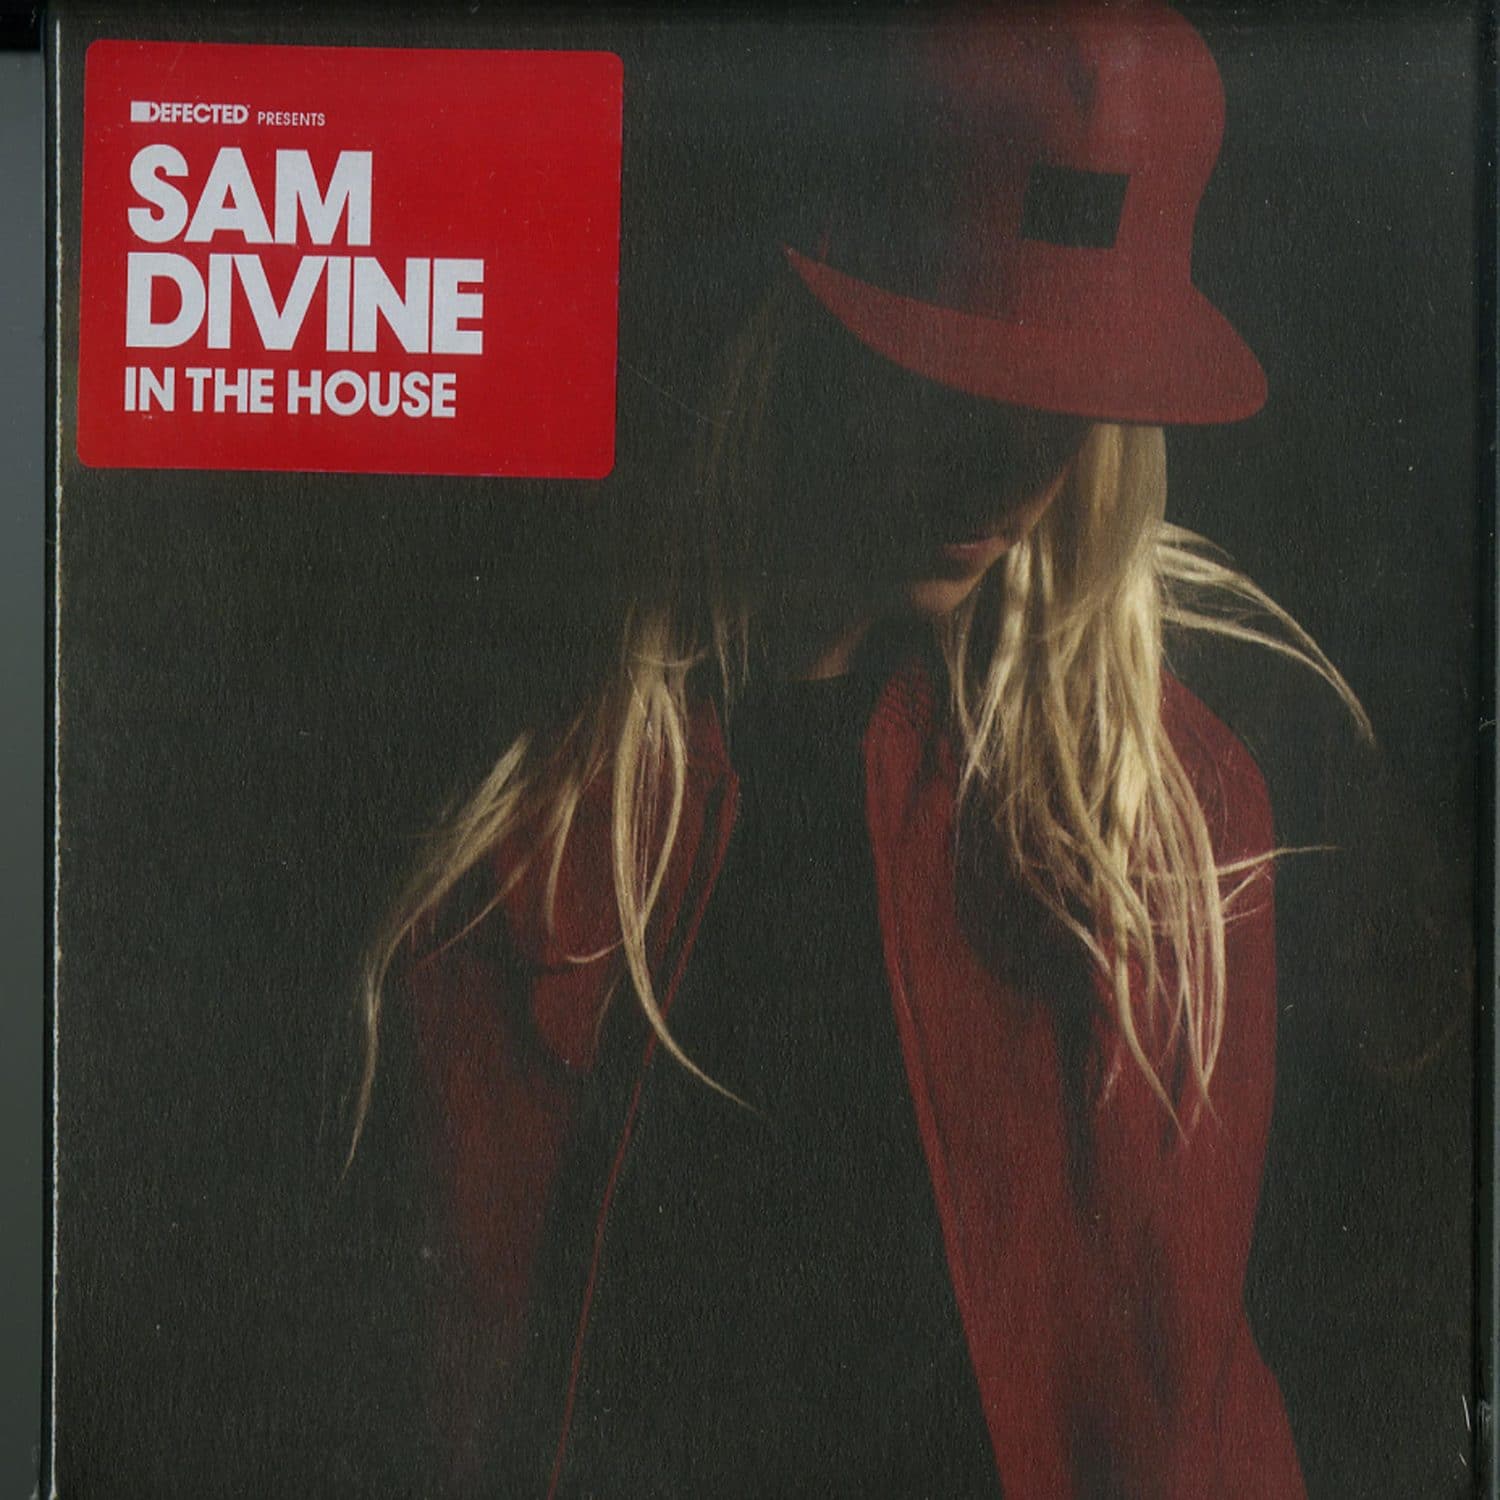 Various Artists - DEFECTED PRESENTS: SAM DIVINE IN THE HOUSE 